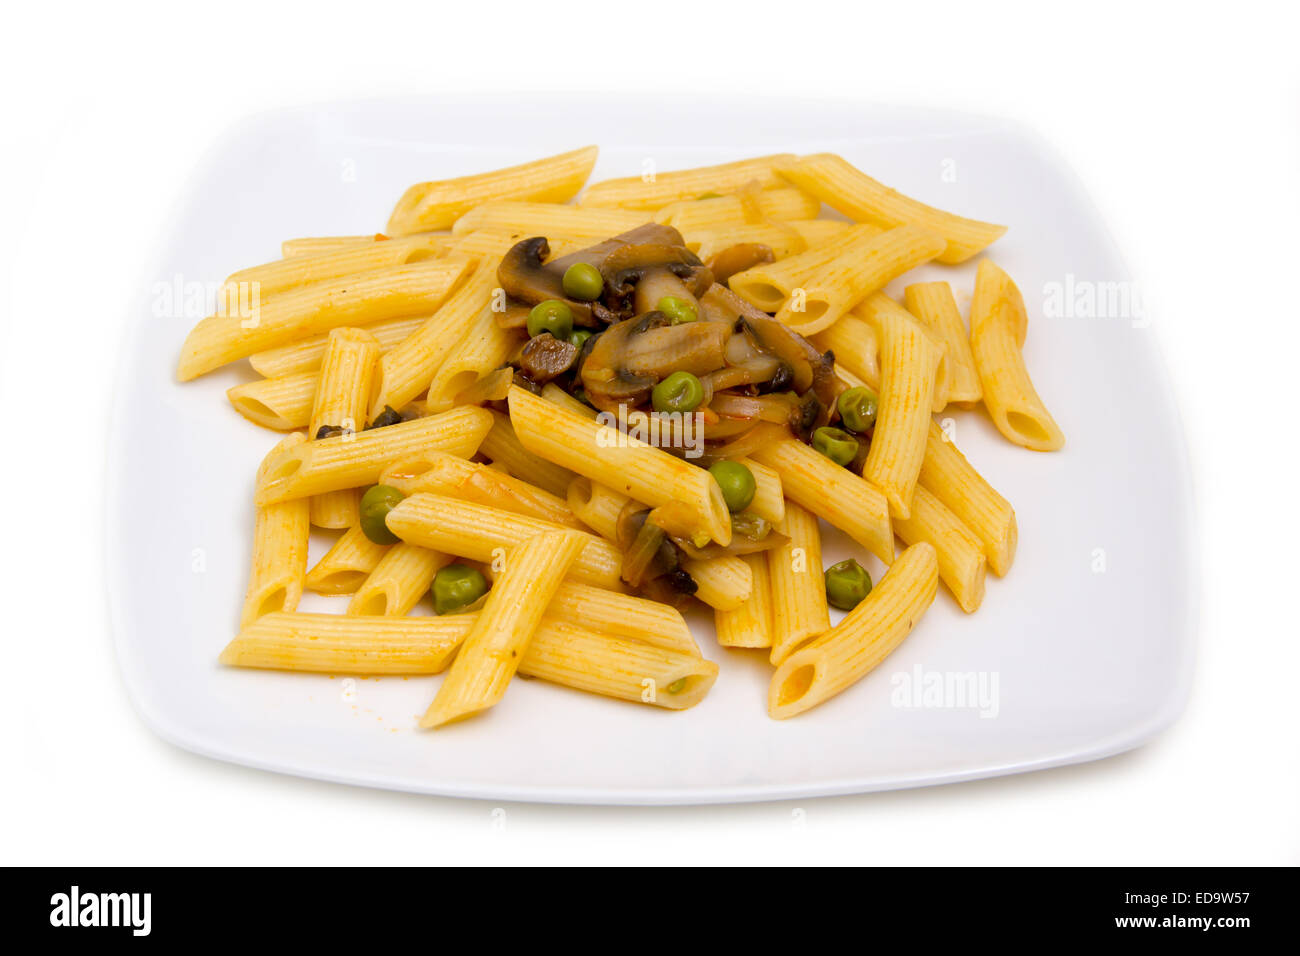 Pasta with mushrooms and peas on white background Stock Photo